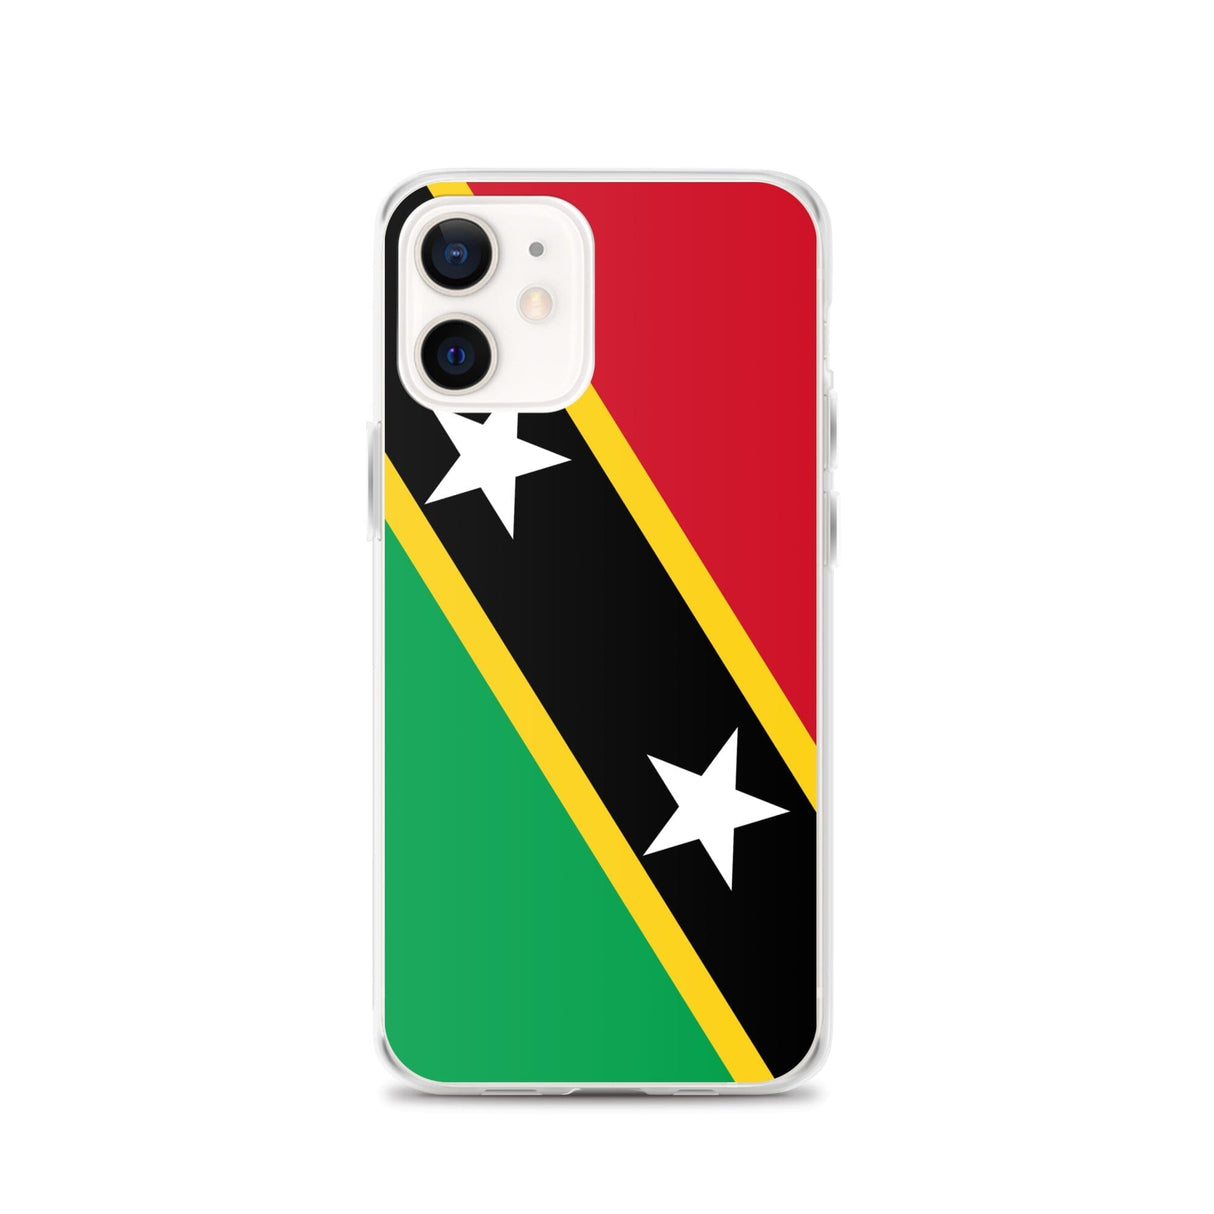 Flag of Saint Kitts and Nevis iPhone Case - Pixelforma